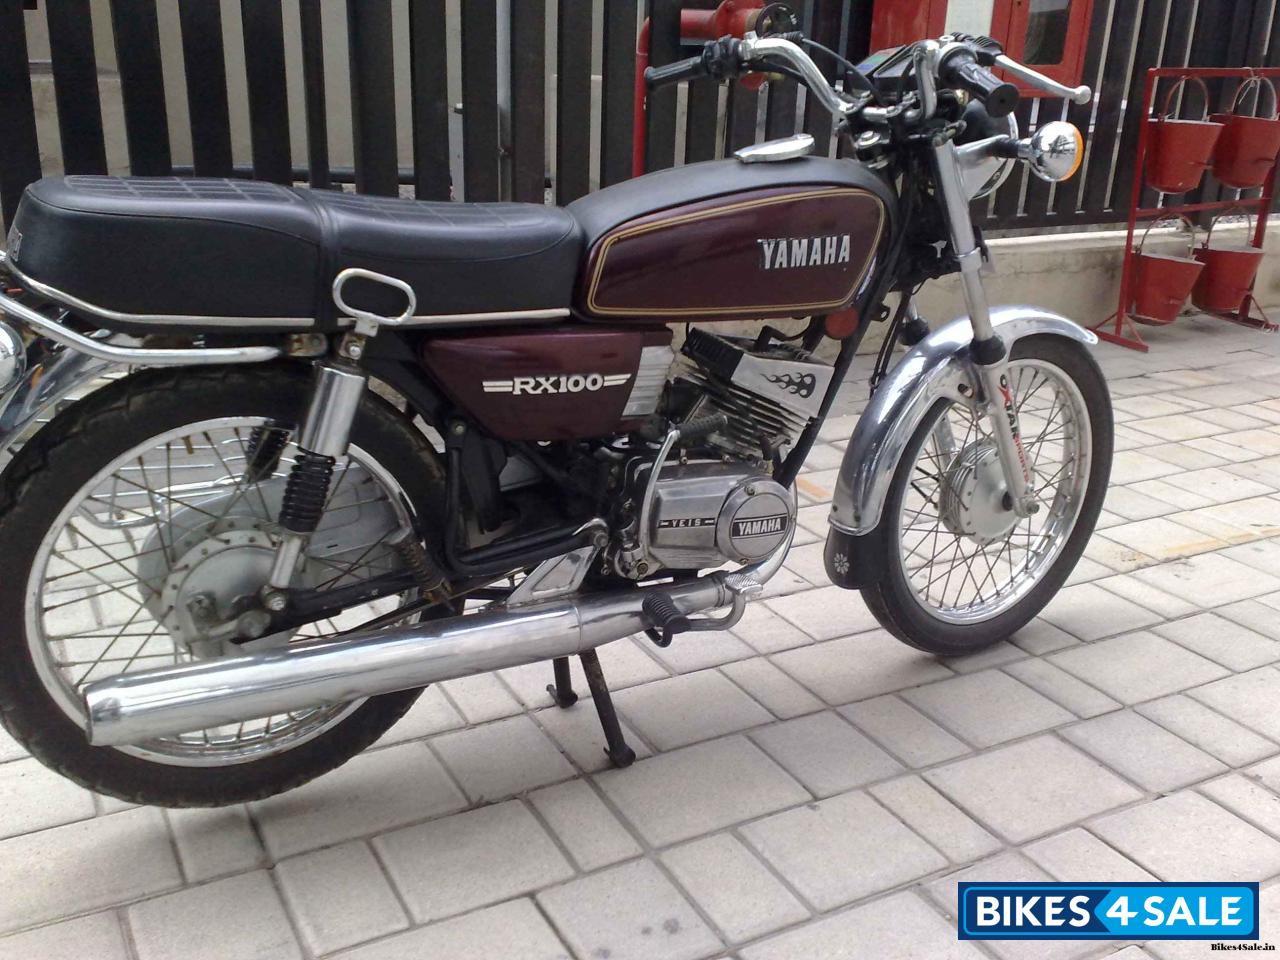 Used 1995 Model Yamaha Rx 100 For Sale In Hyderabad Id Bikes4sale